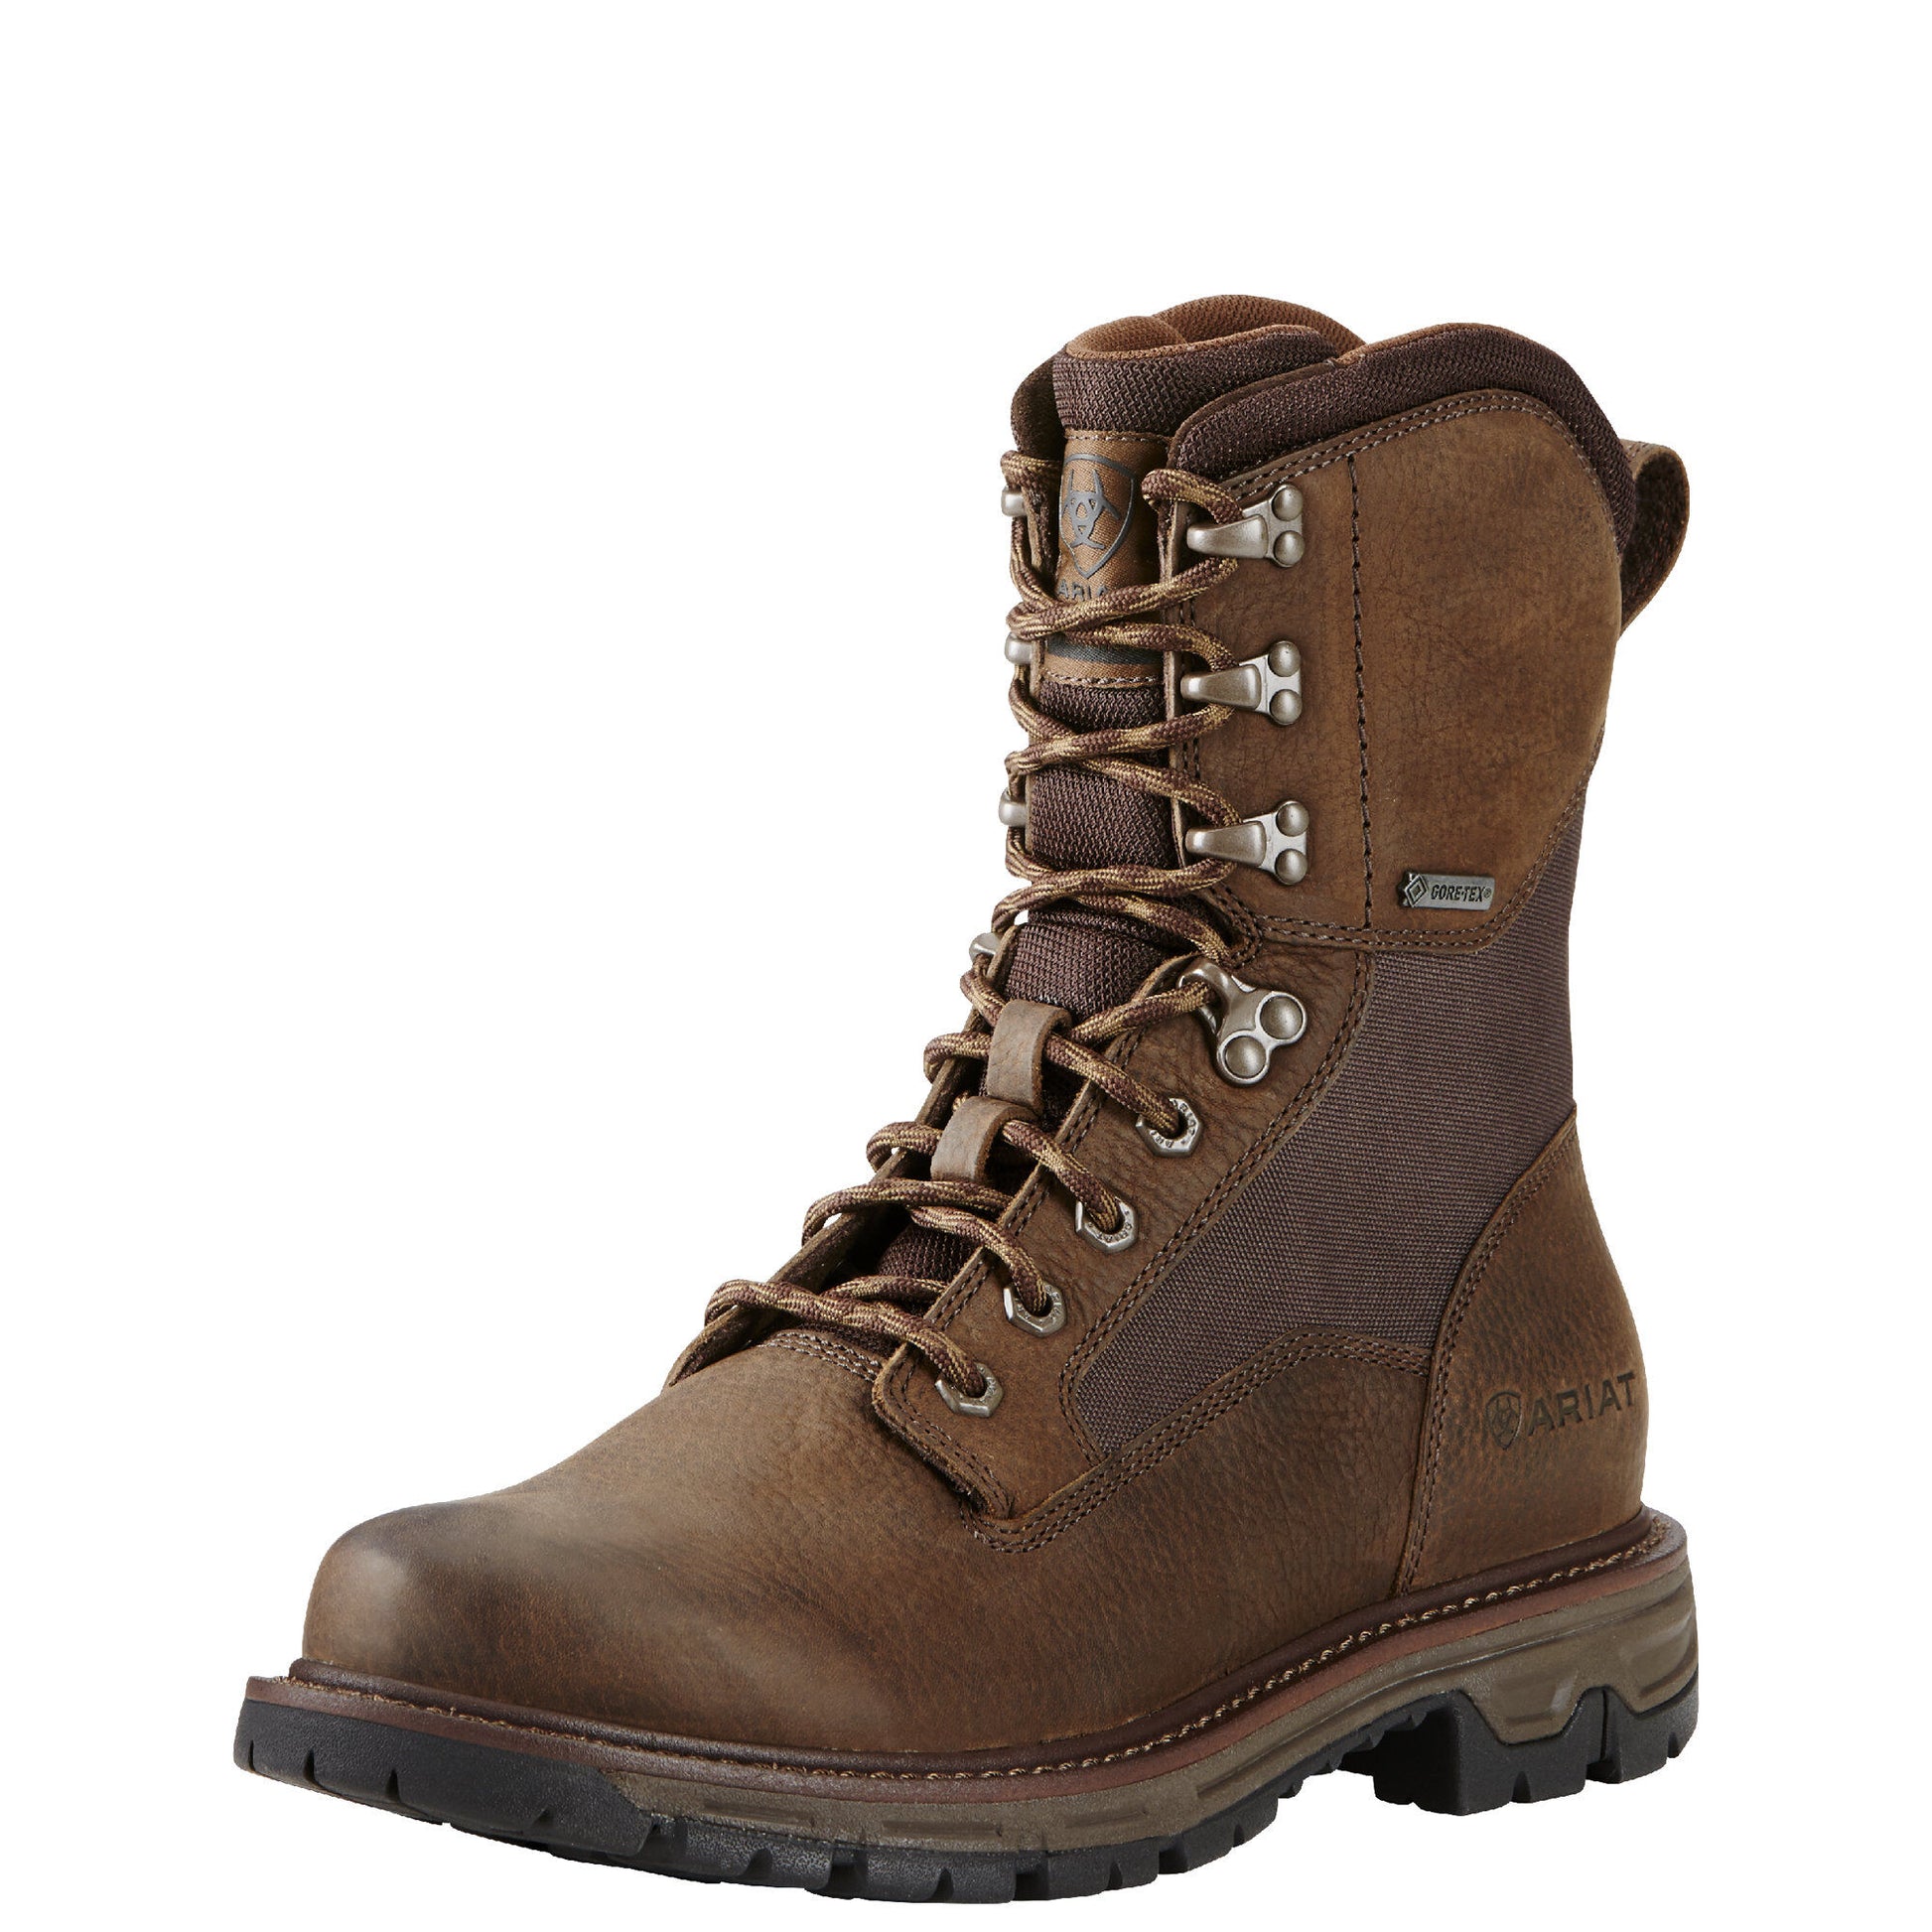 Ariat Men's Conquest 8" GTX Boot - Pebbled Brown - French's Boots